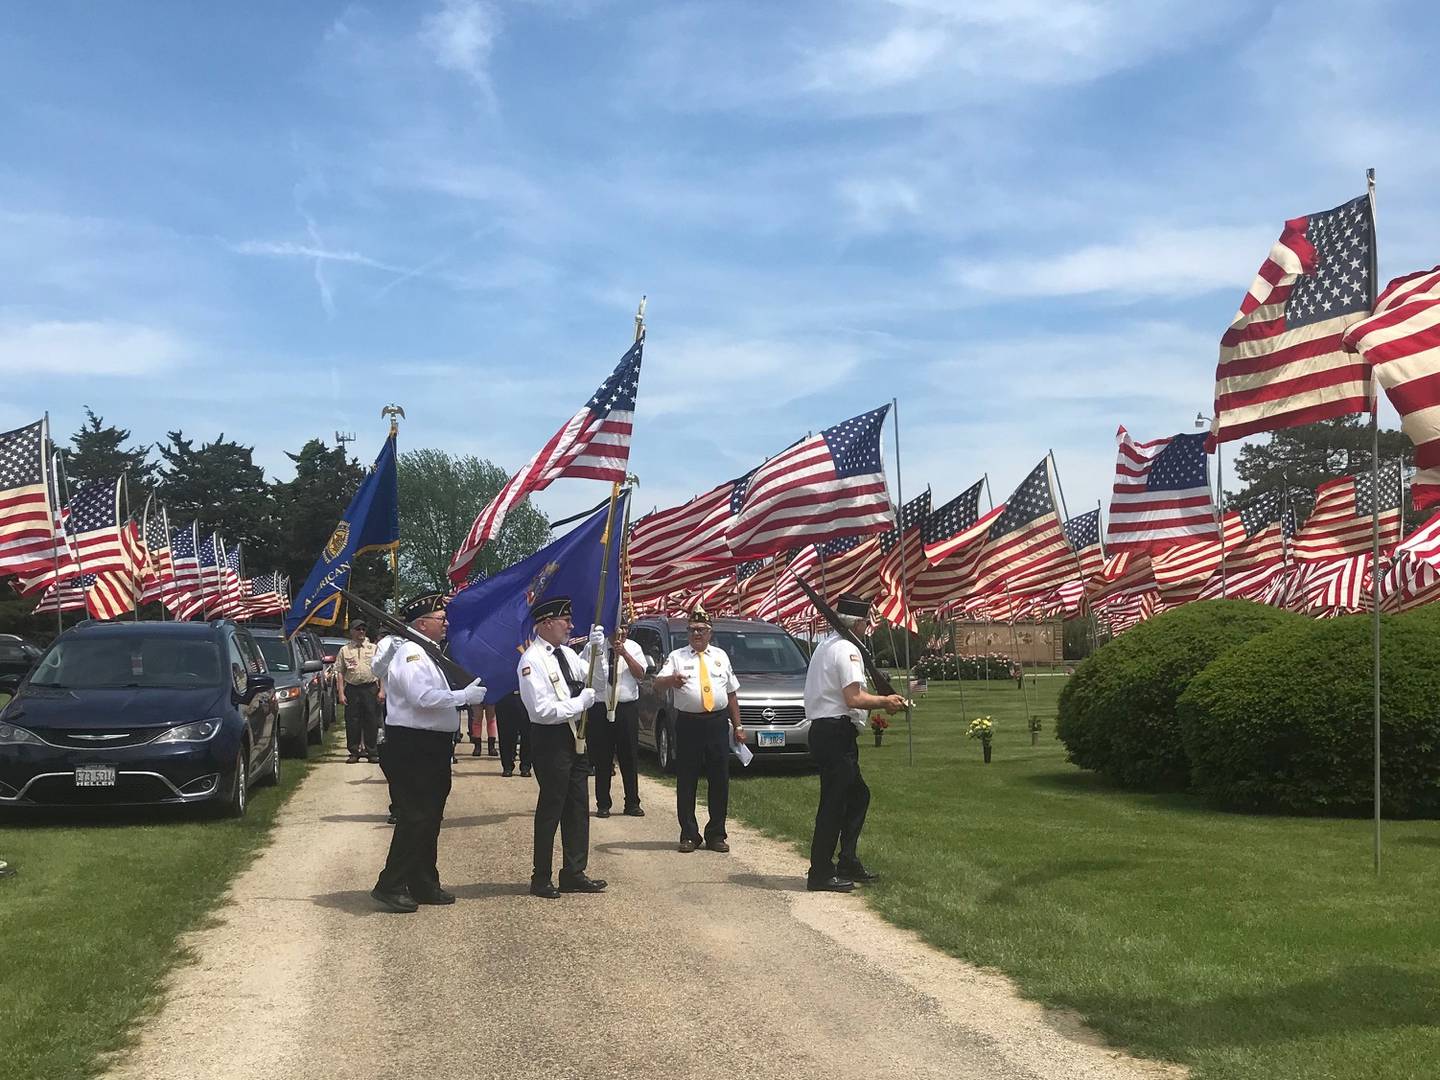 Veterans groups march into Valley Memorial Park along the "Avenue of Flags" Monday for Memorial Day services. The avenue contained 469 flags for veterans interred there, 13 of whom were killed in action.